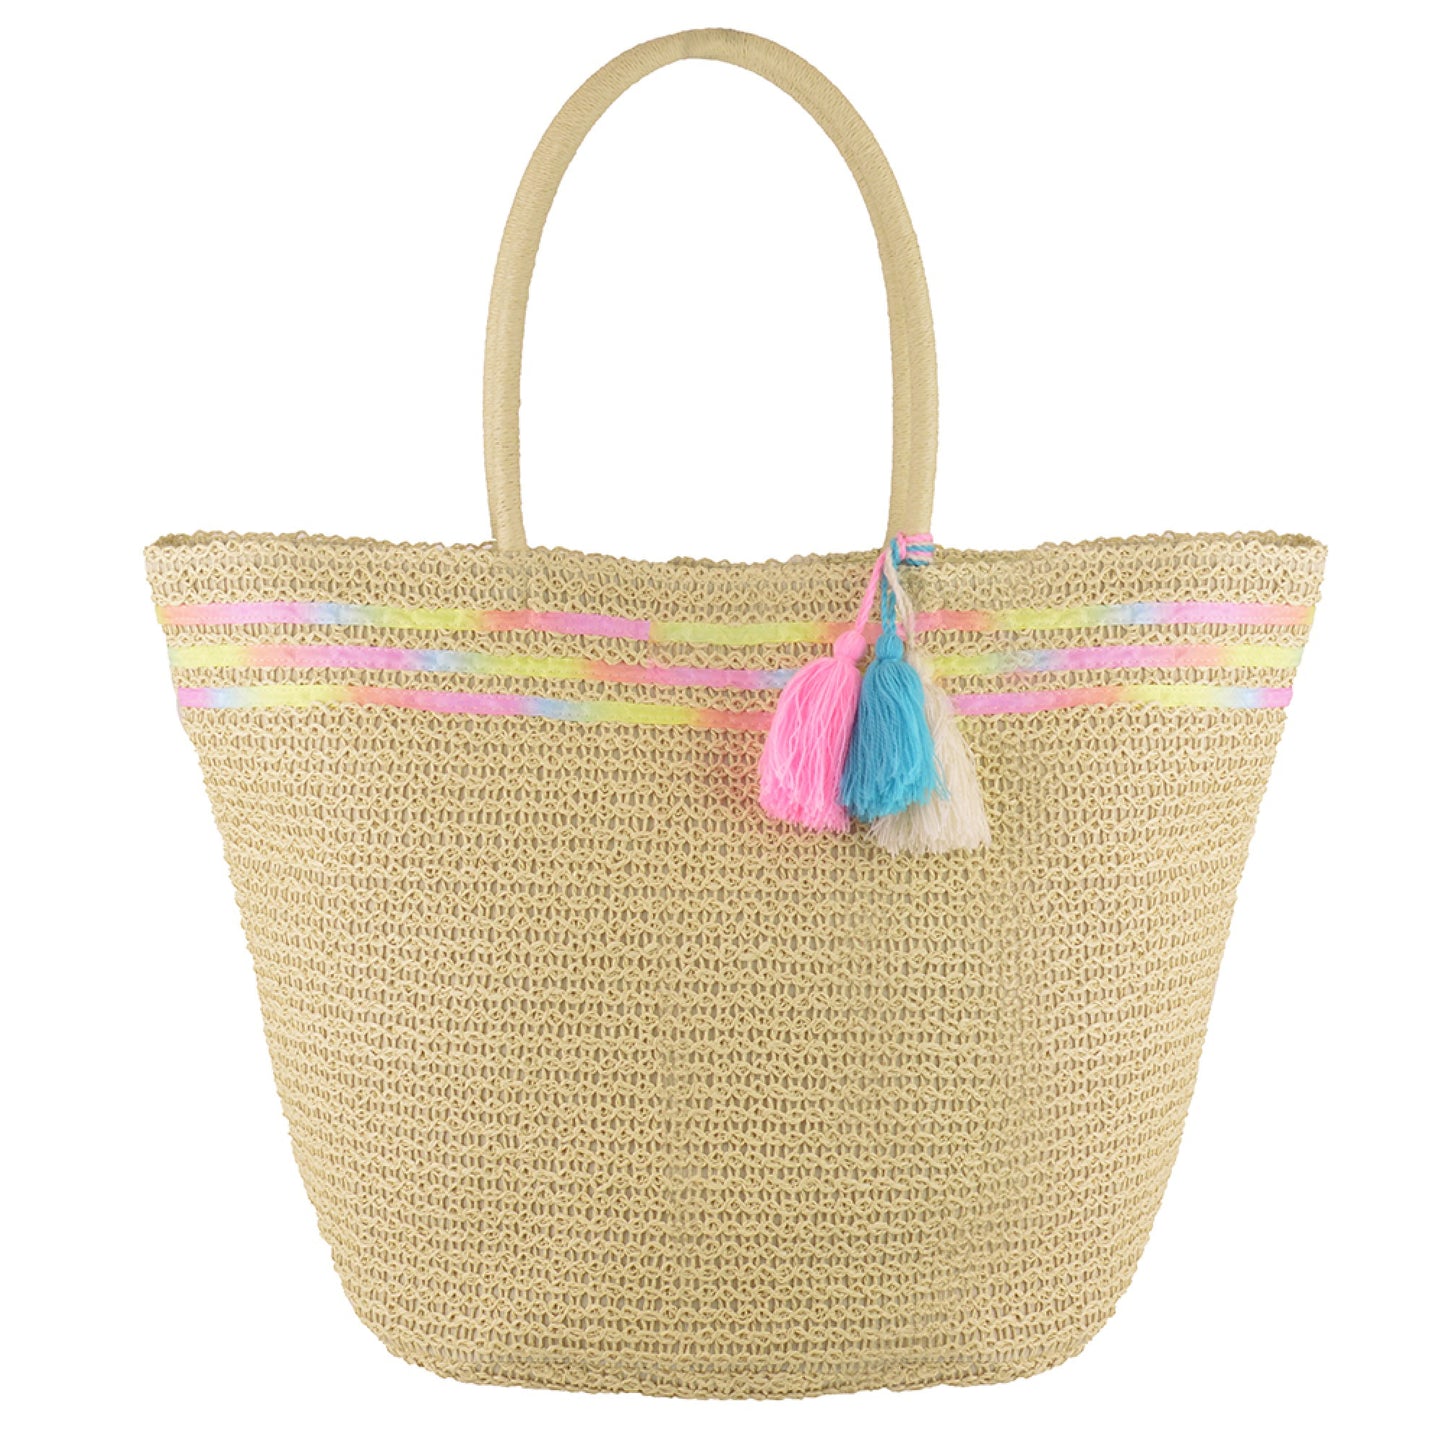 Cream Paper Straw Summer Tote Beach Bag with Pom Poms